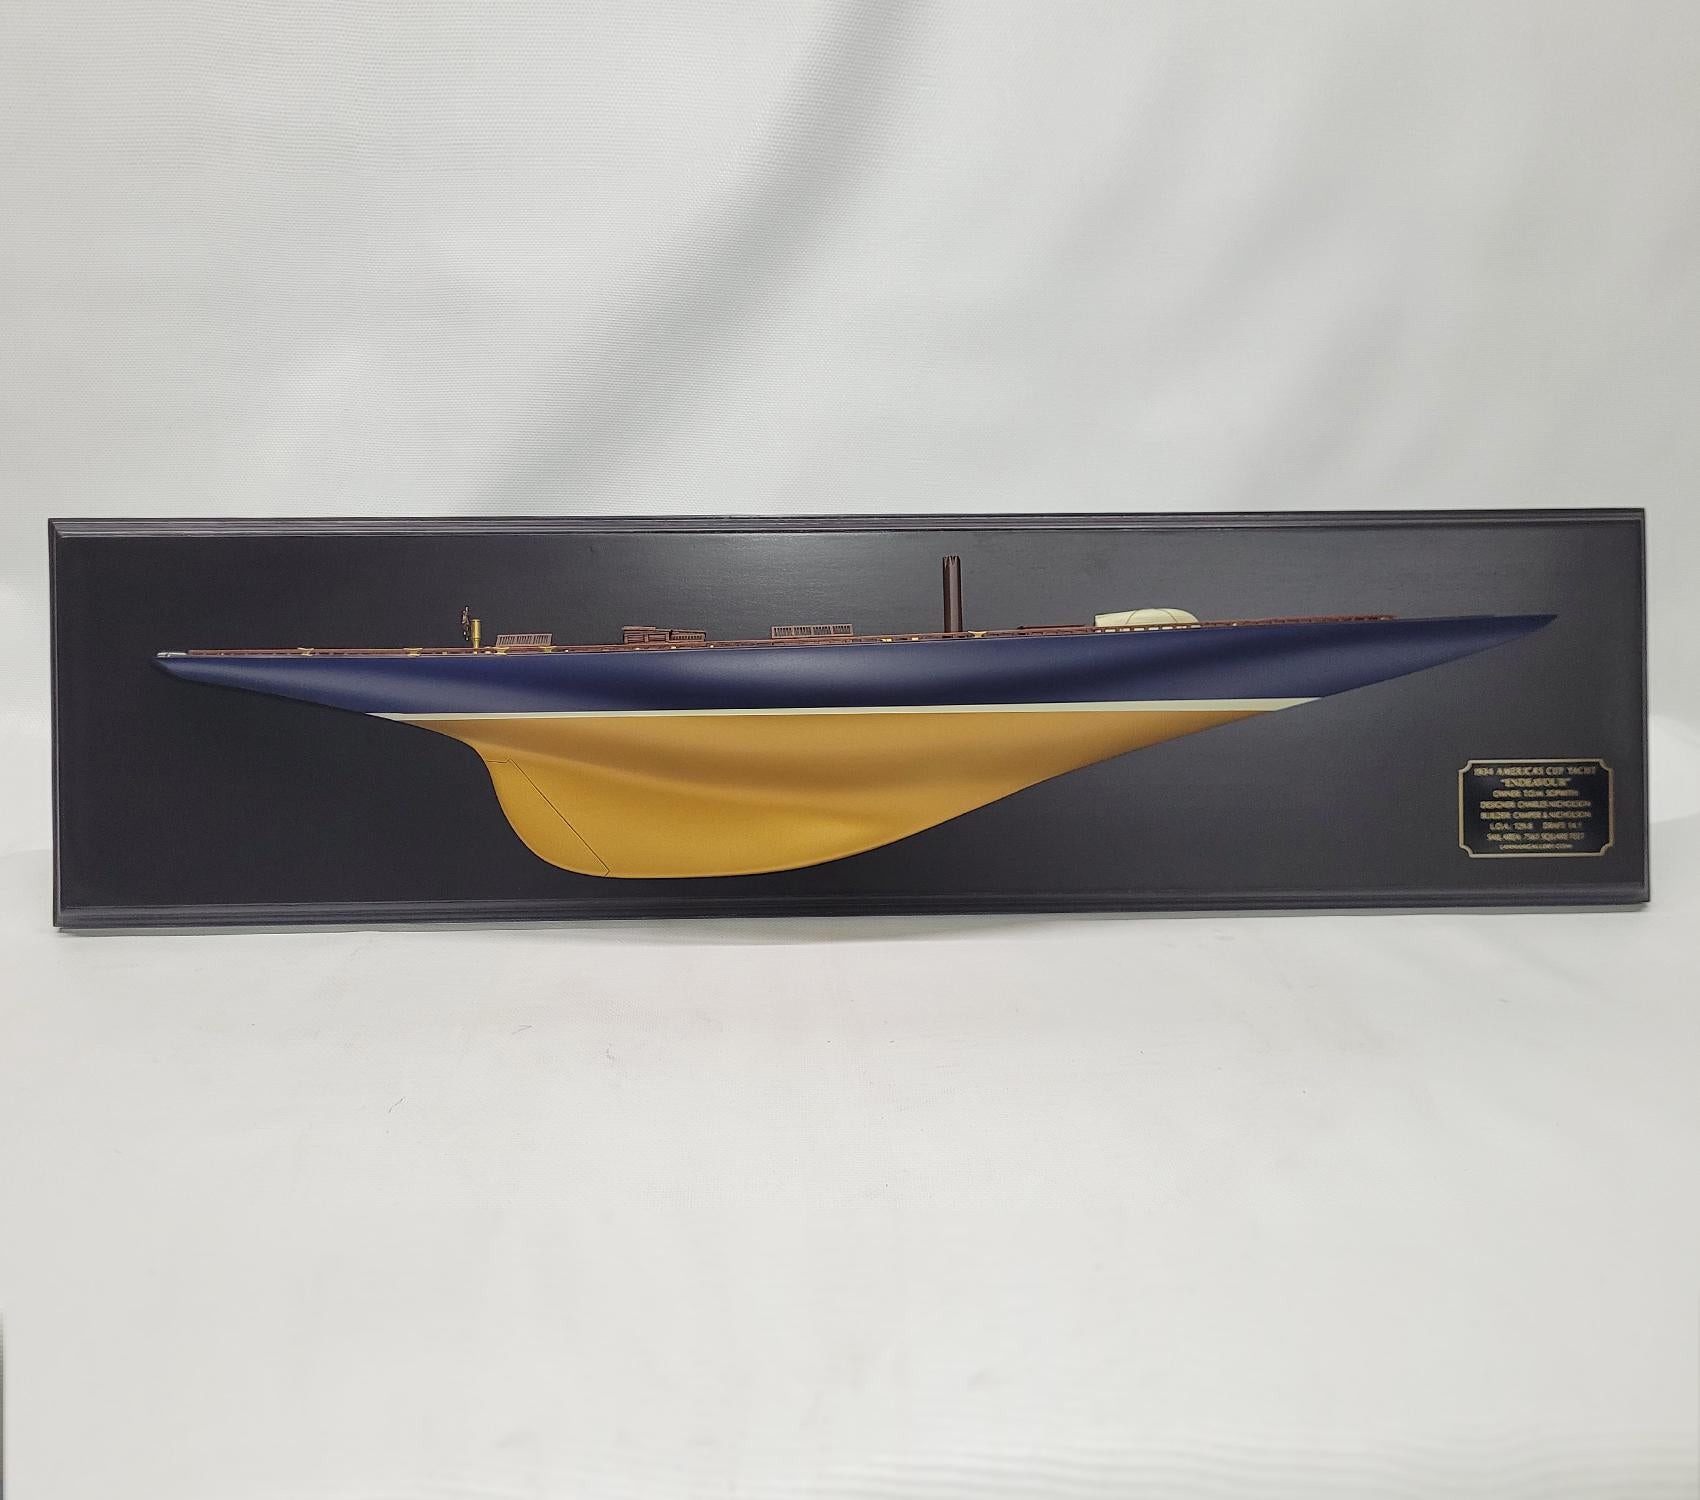 Half model of the America’s cup Yacht Endeavor. This is a 3-foot hull mounted blackboard. The hull is painted blue over gold. The planked deck has skylights, Companion Way, Spinnaker pole, Lifeboat, Cleats, Toe rail, Etc. Mounted to a varnished